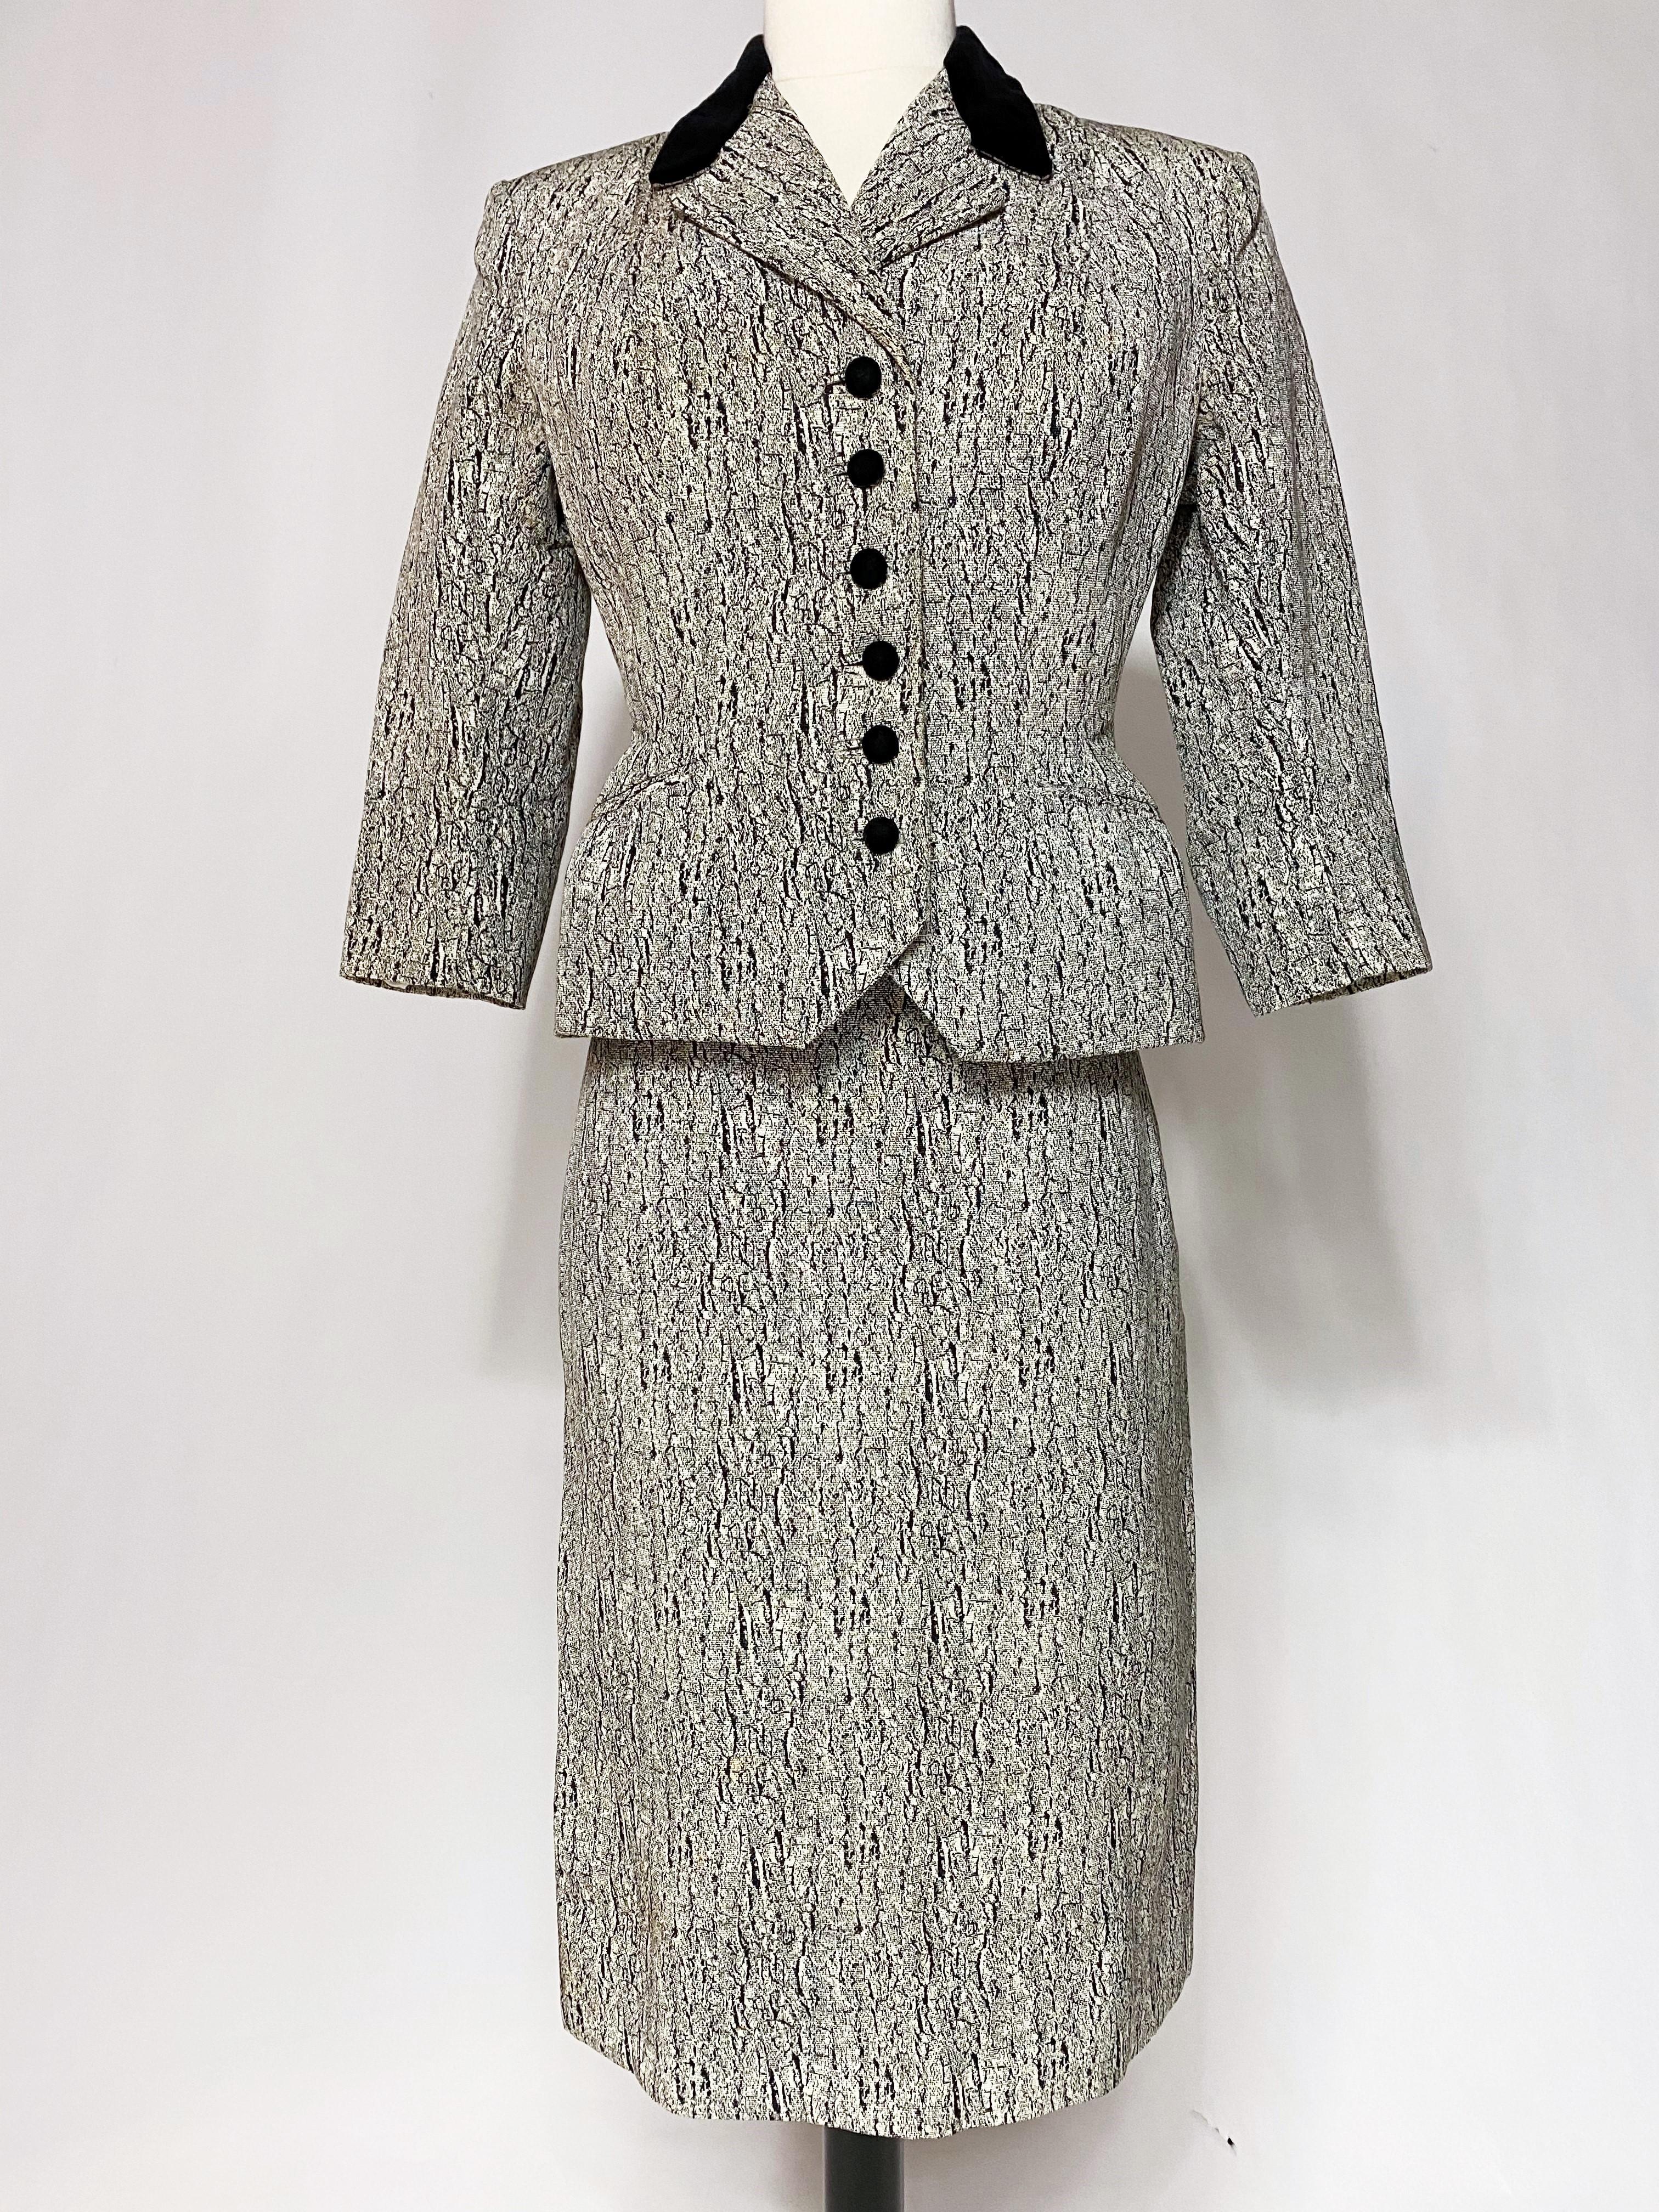 Gray A Couture Bar skirt suit in marbled printed silk faille - France Circa 1947-1950 For Sale